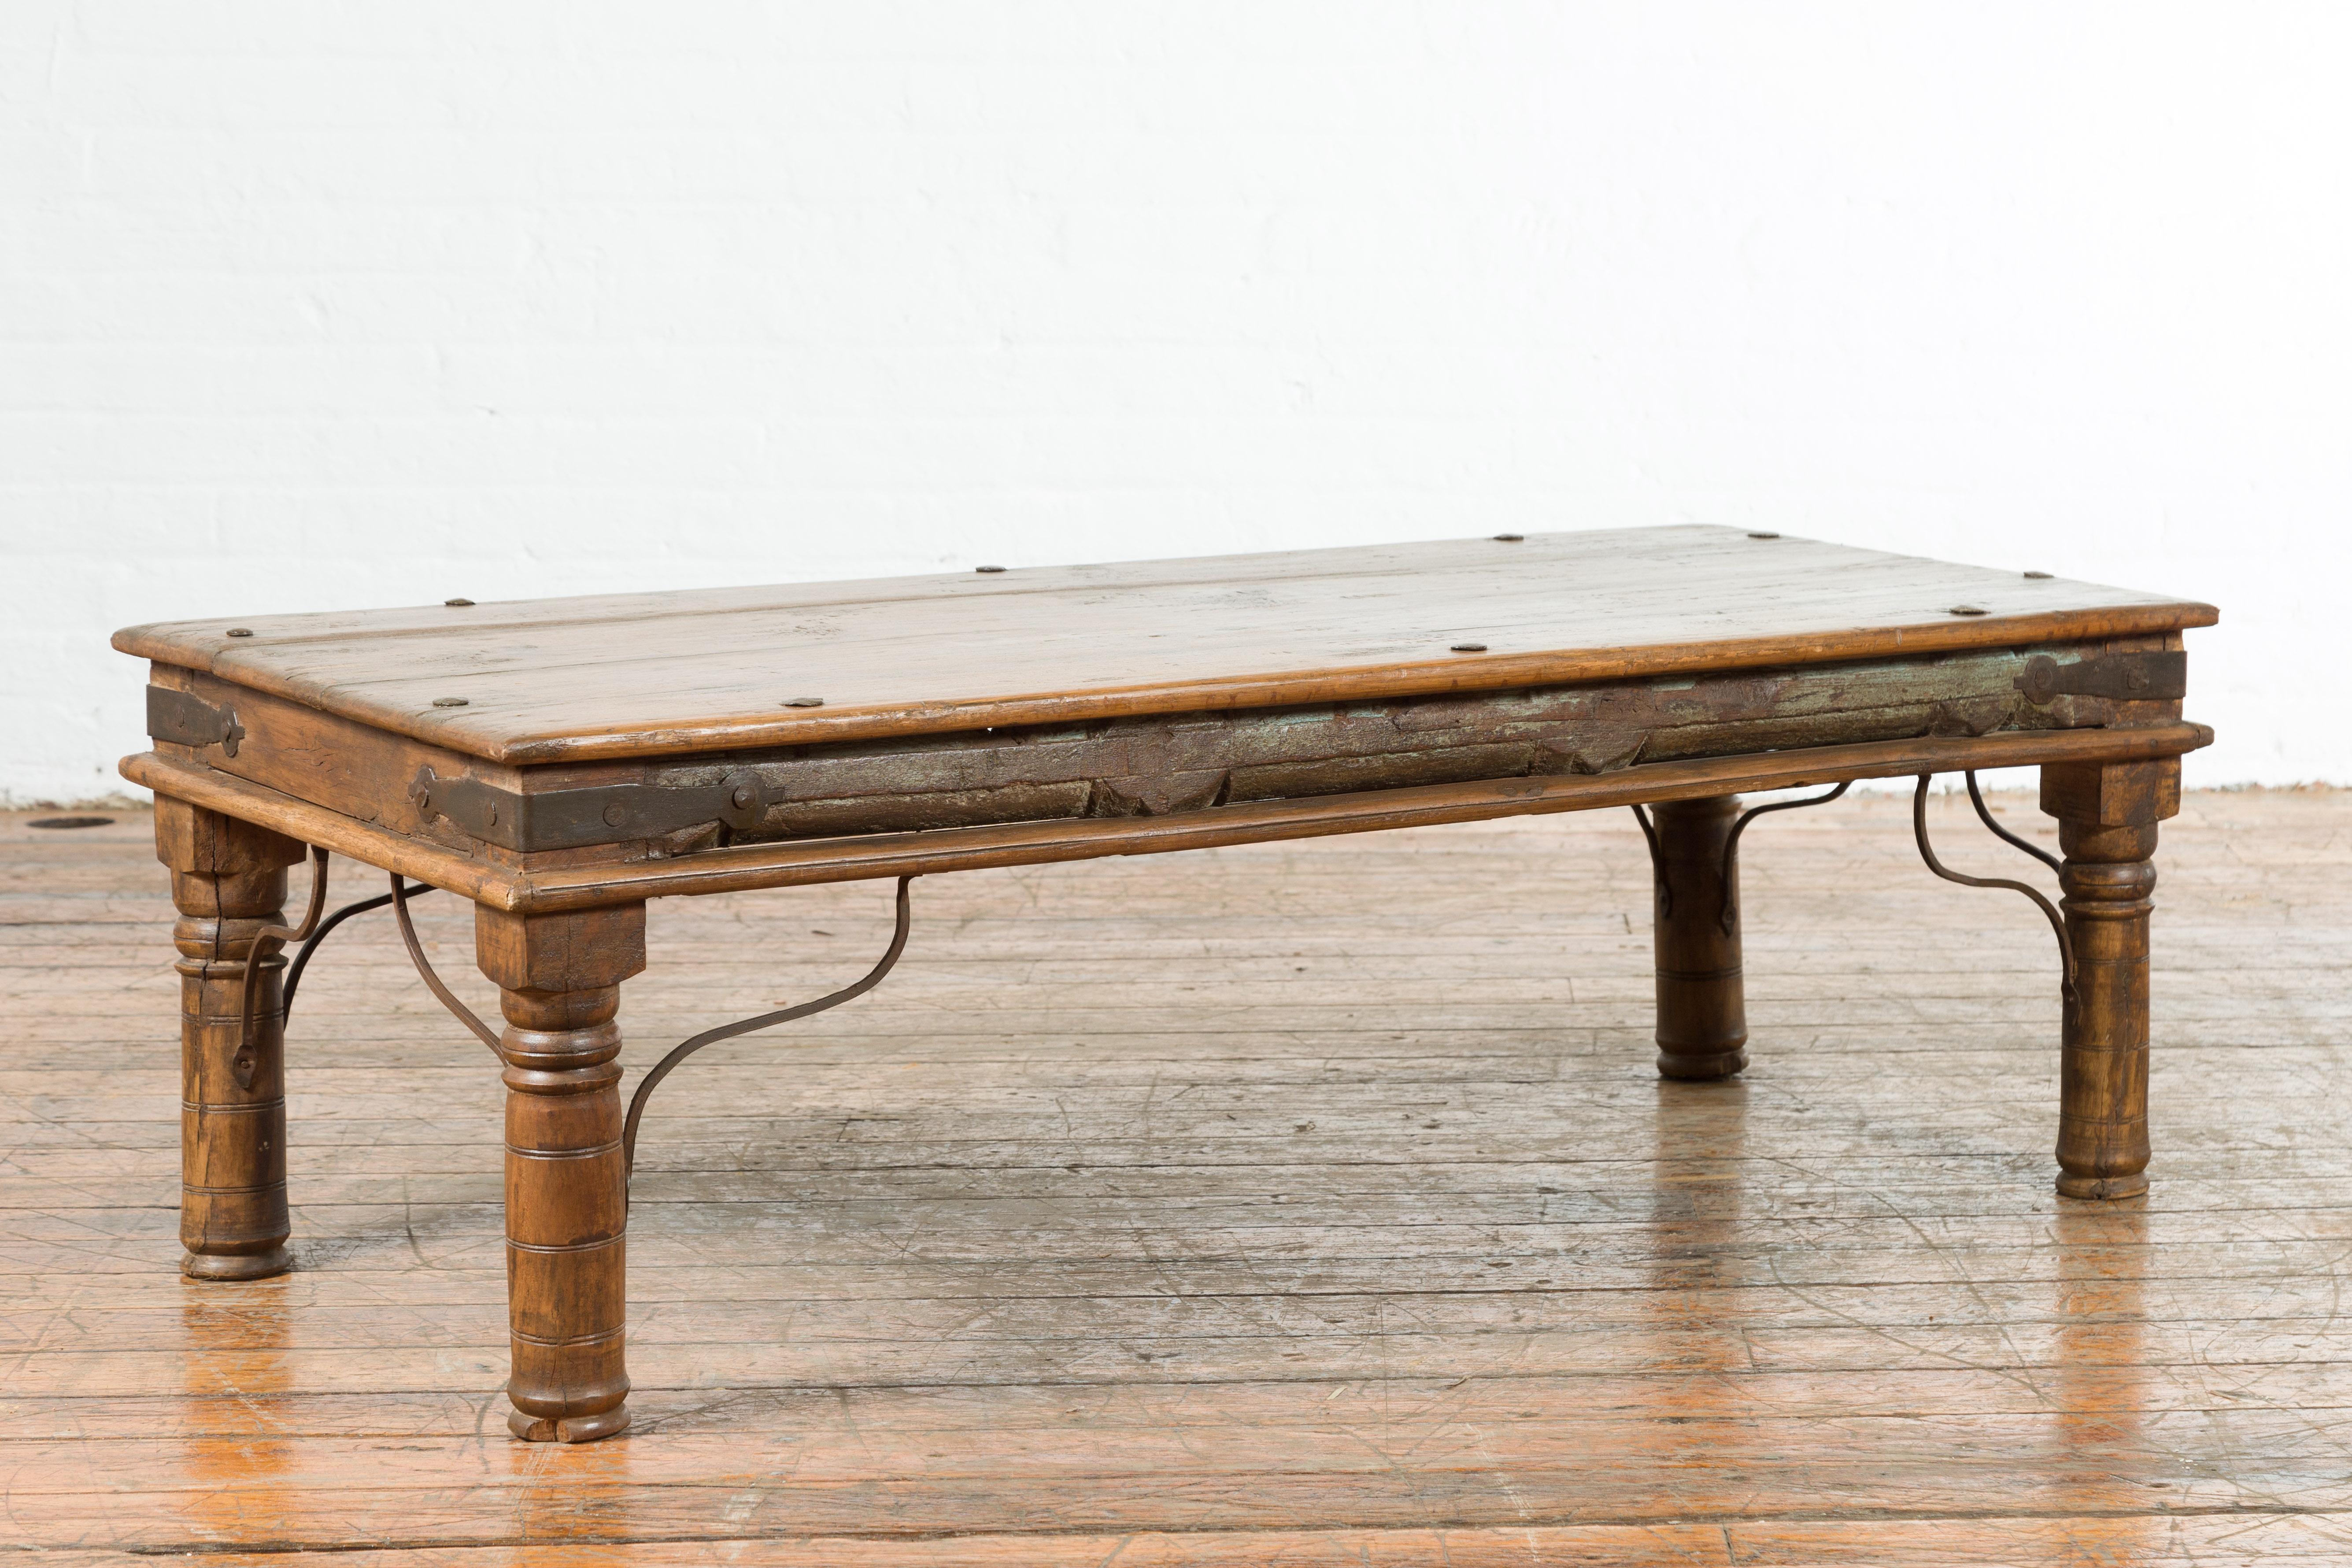 19th Century Rustic Indian Coffee Table with Painted Apron and Iron Accents 7